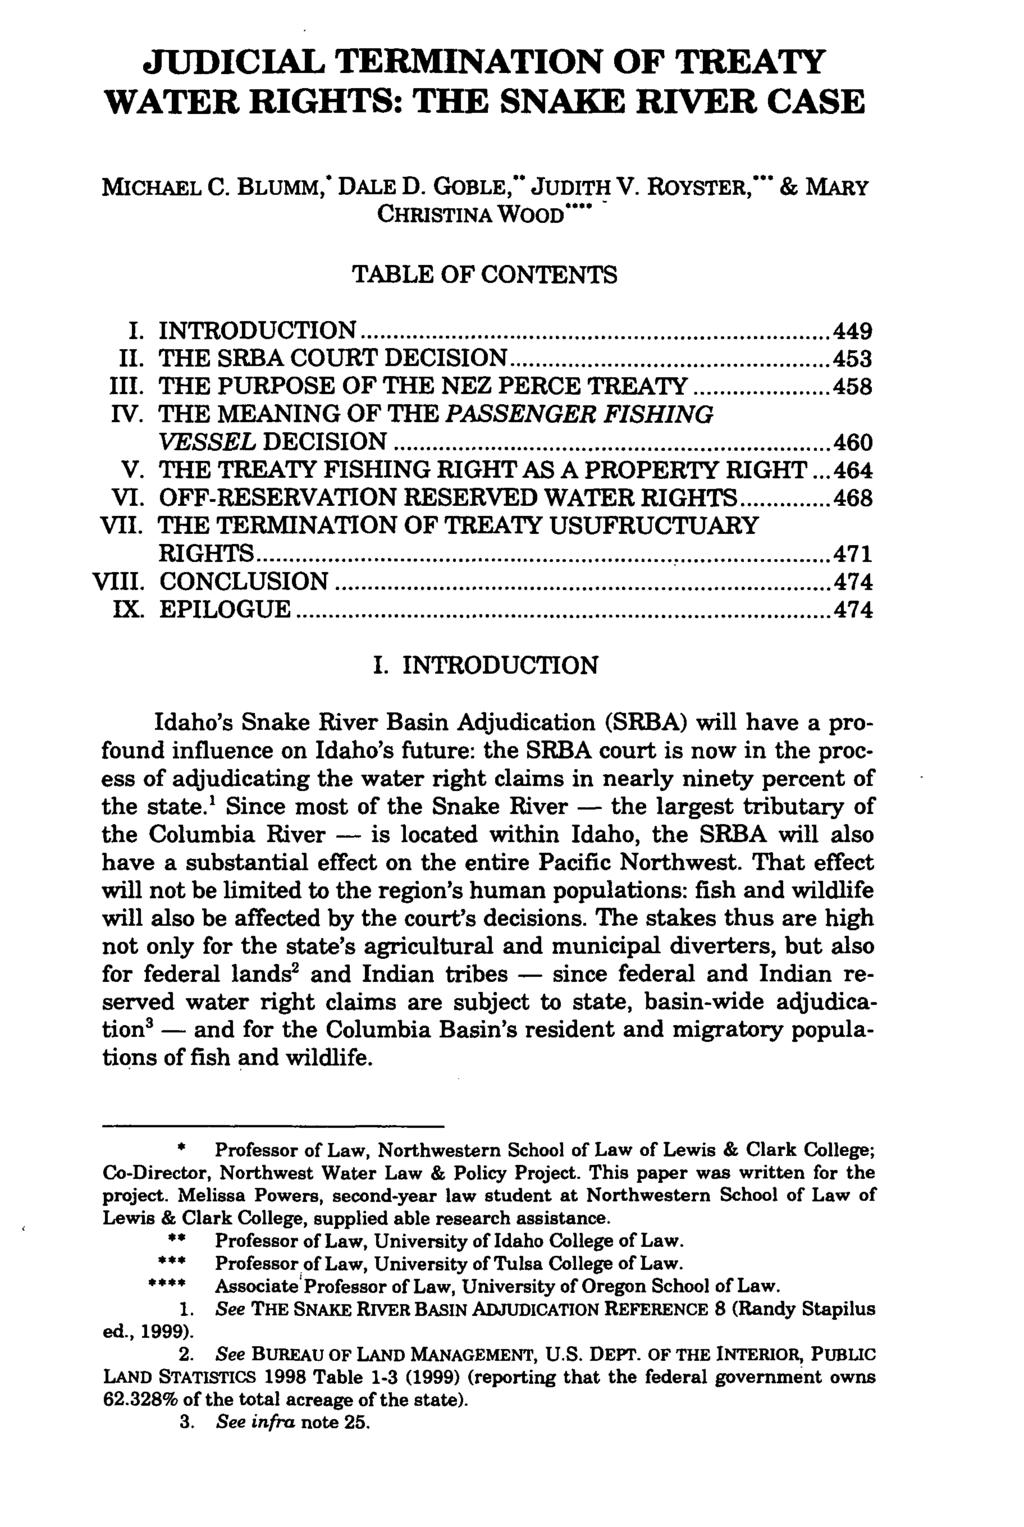 JUDICIAL TERMINATION OF TREATY WATER RIGHTS: THE SNAKE RIVER CASE MICHAEL C. BLUMM," DALE D. GOBLE,*" JUDITH V. ROYSTER,"" & MARY CHRISTINA WOOD**** TABLE OF CONTENTS I. IN TRODU CTION... 449 II.